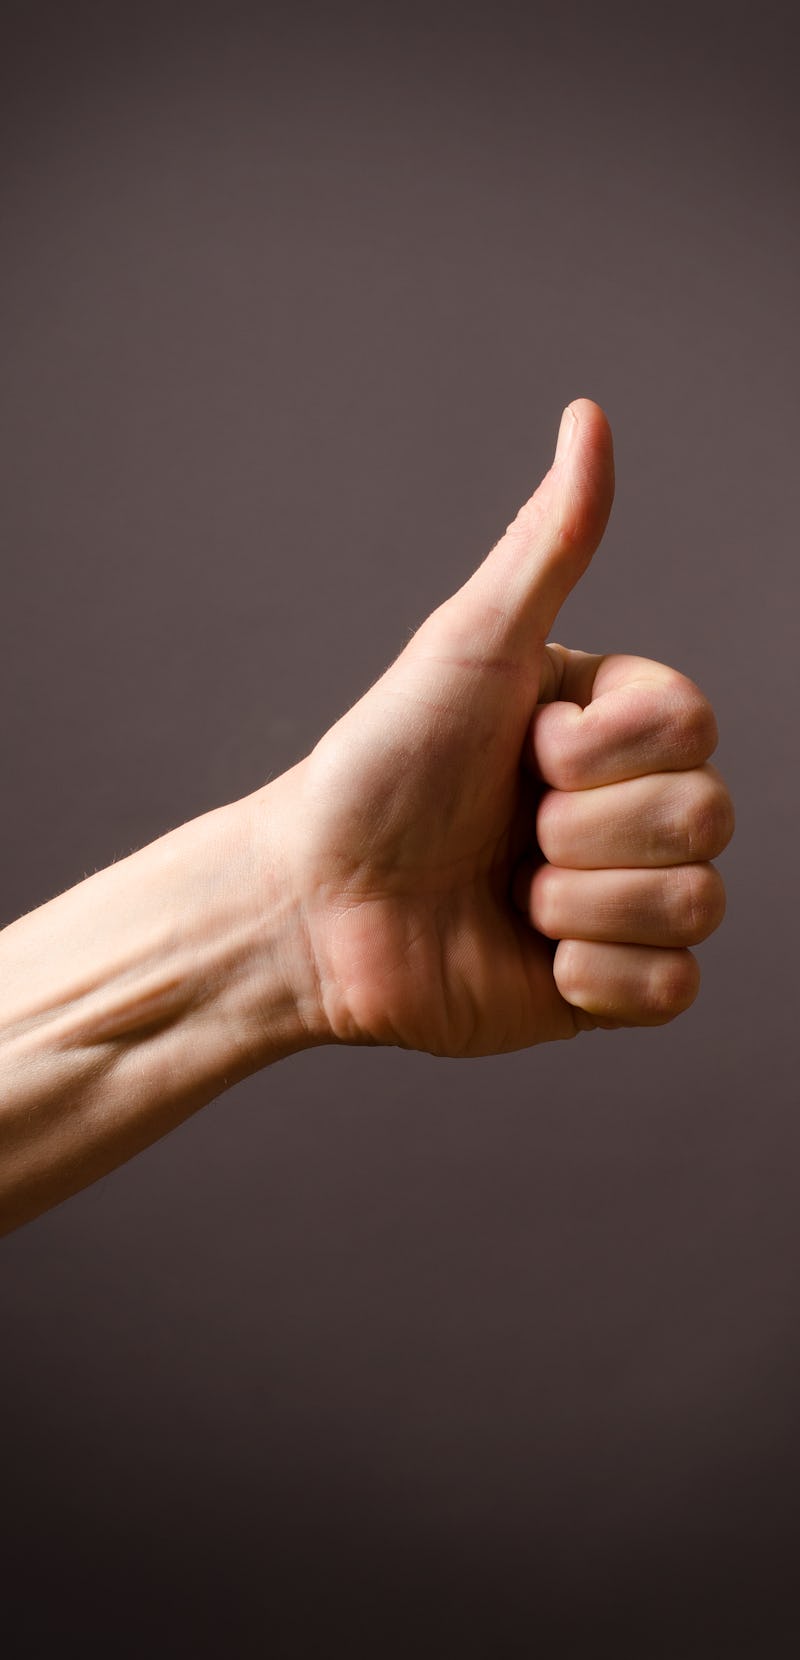 hand giving thumbs up gesture